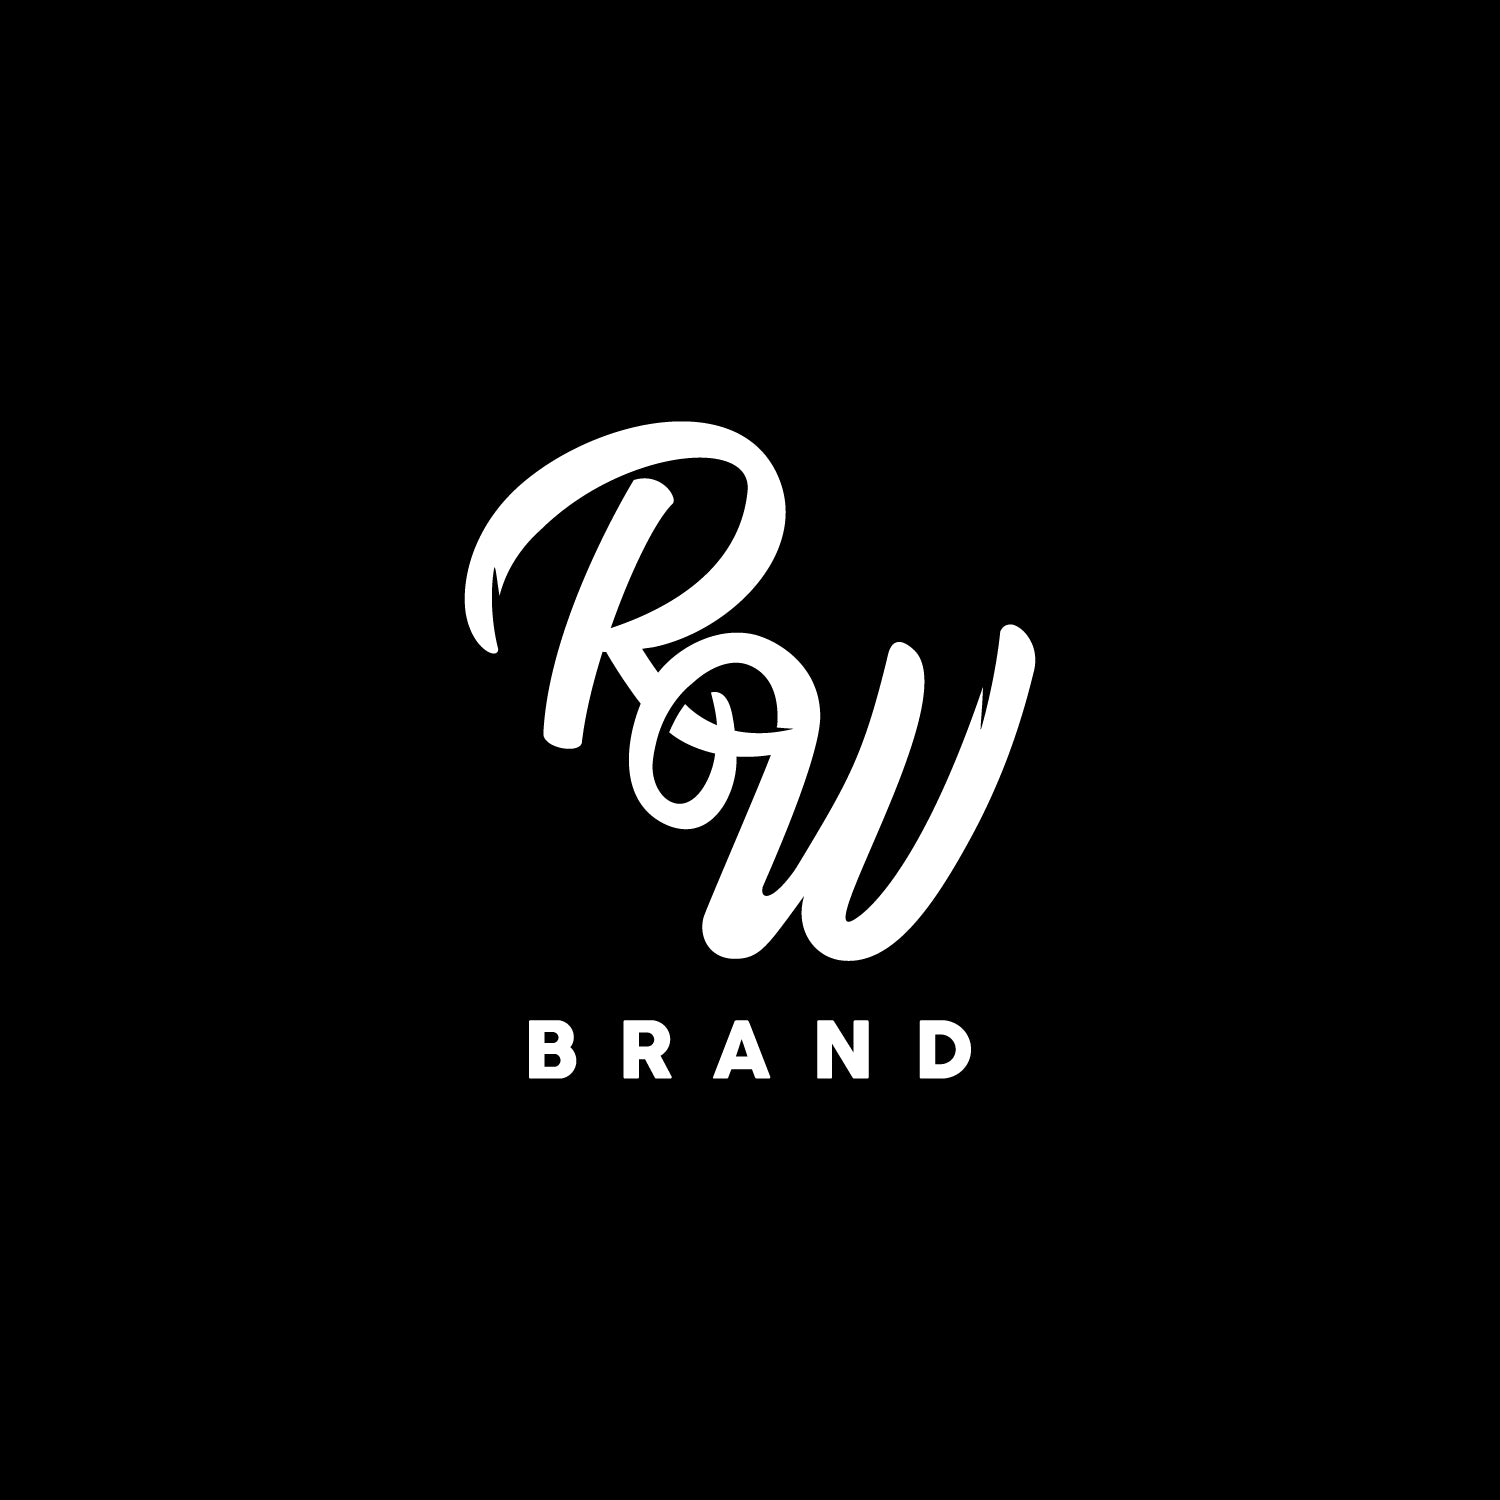 All Products - The RW Brand